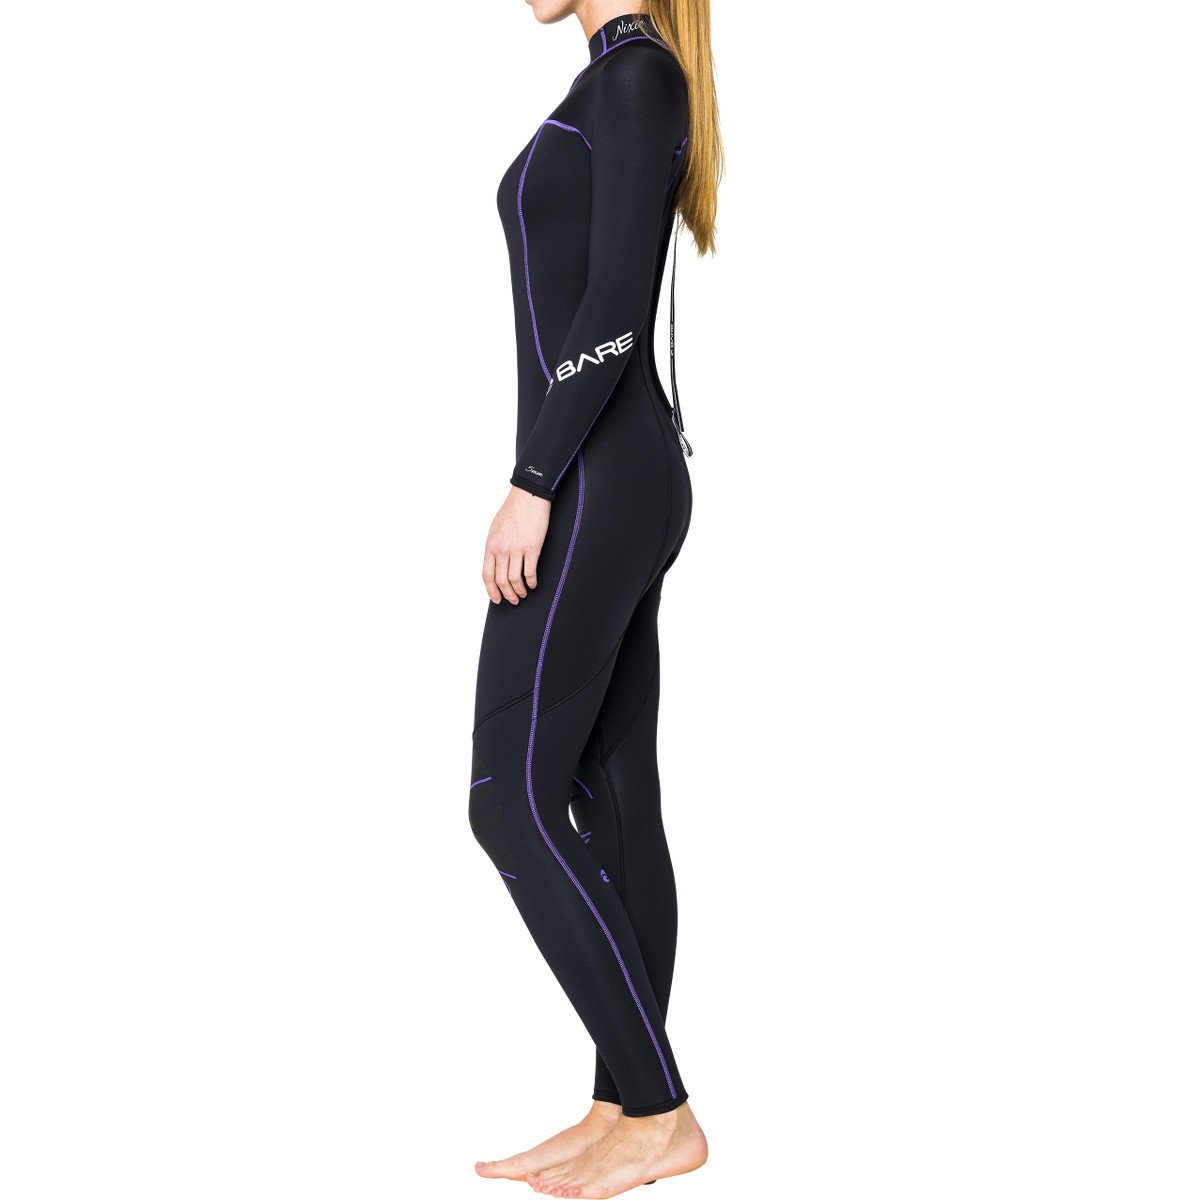 Bare Bare Nixie 5mm Wetsuit - Womens by Oyster Diving Shop